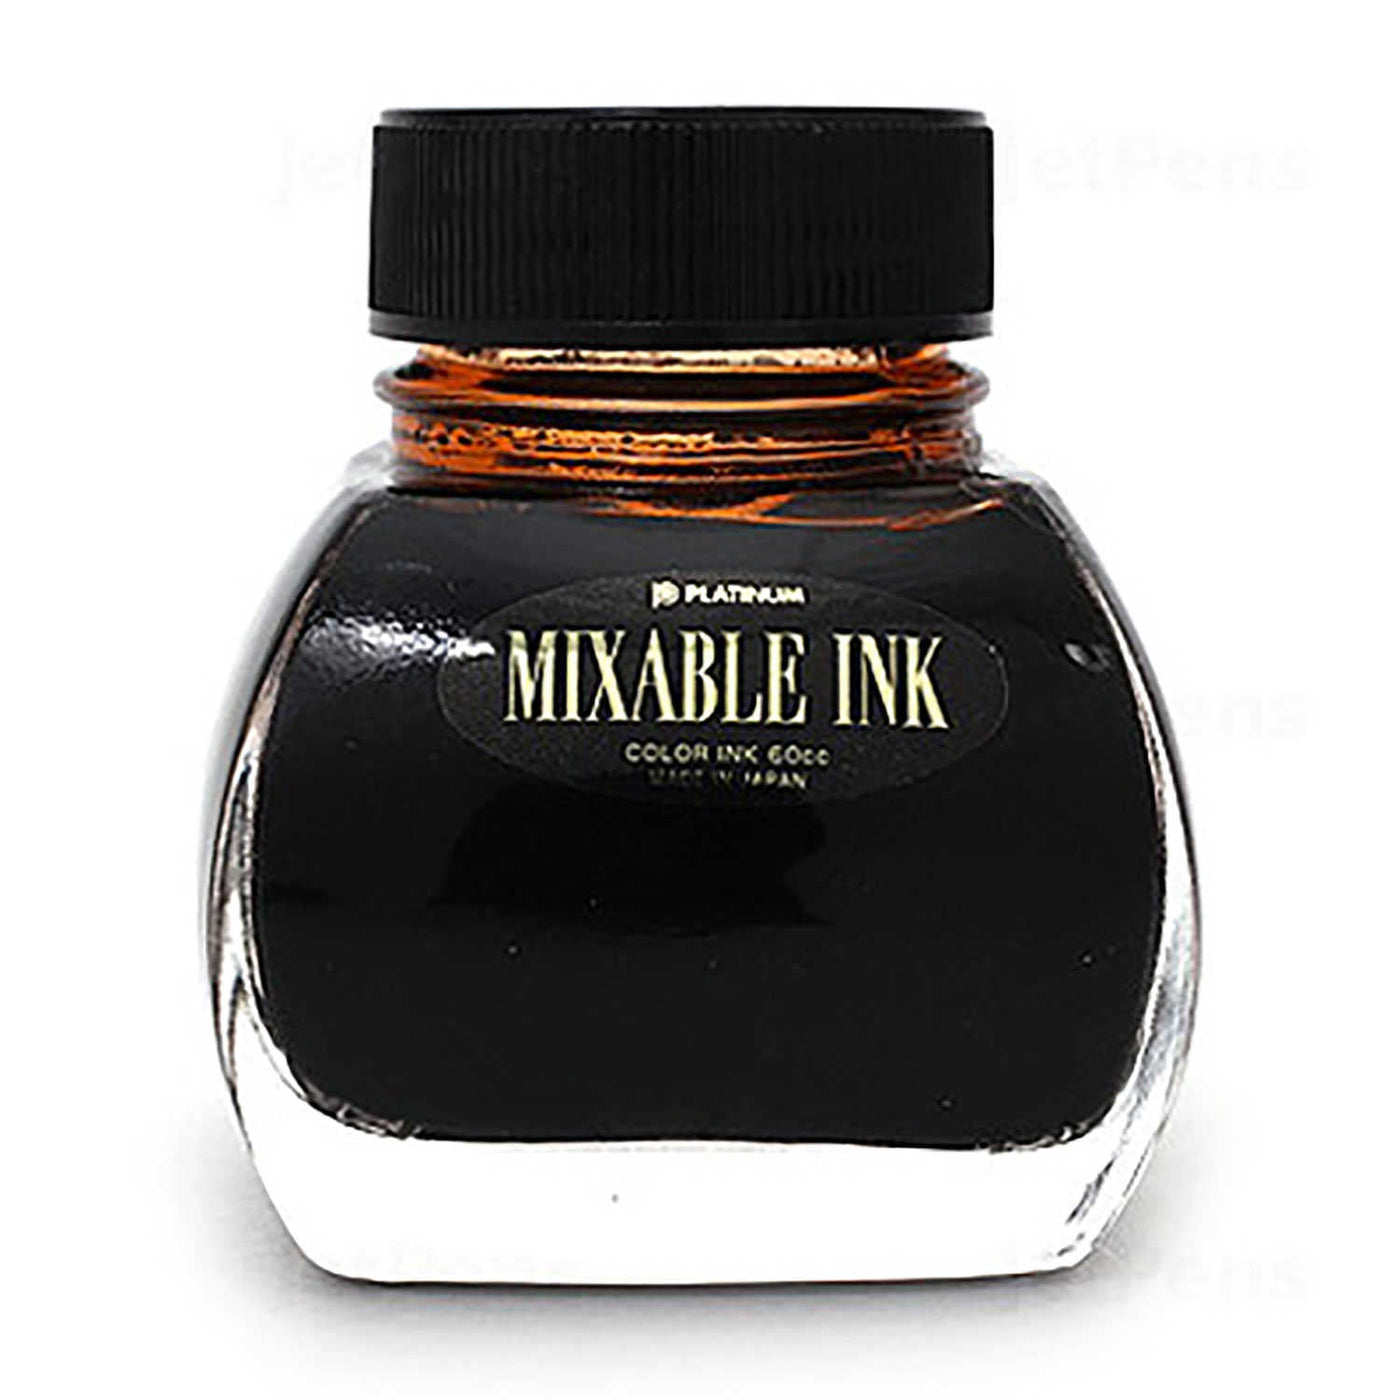 Platinum Mixable Earth Brown Ink Bottle, Brown - 60ml 1